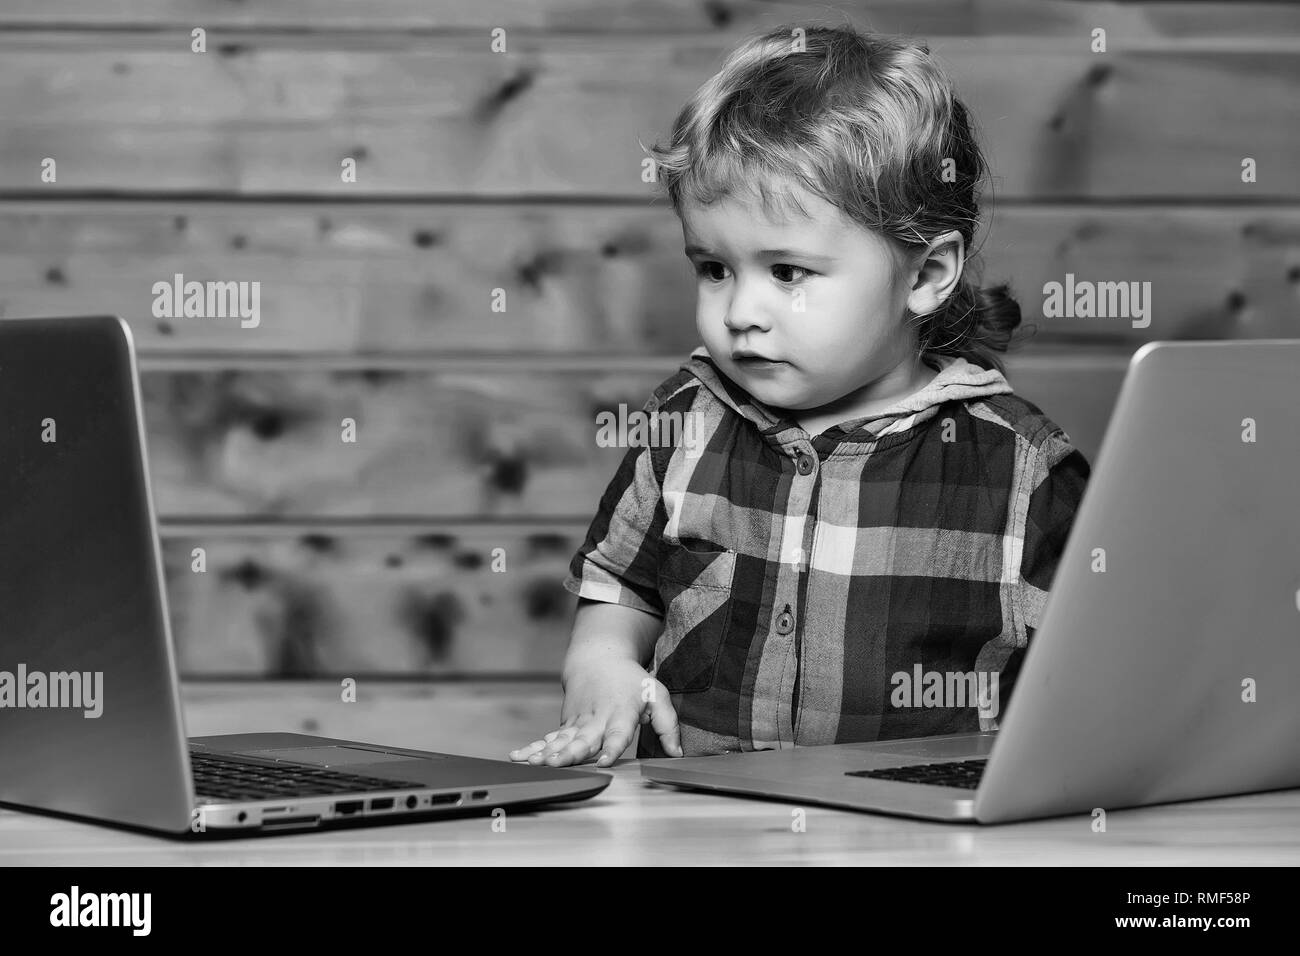 Cute boy plays on computers Stock Photo - Alamy